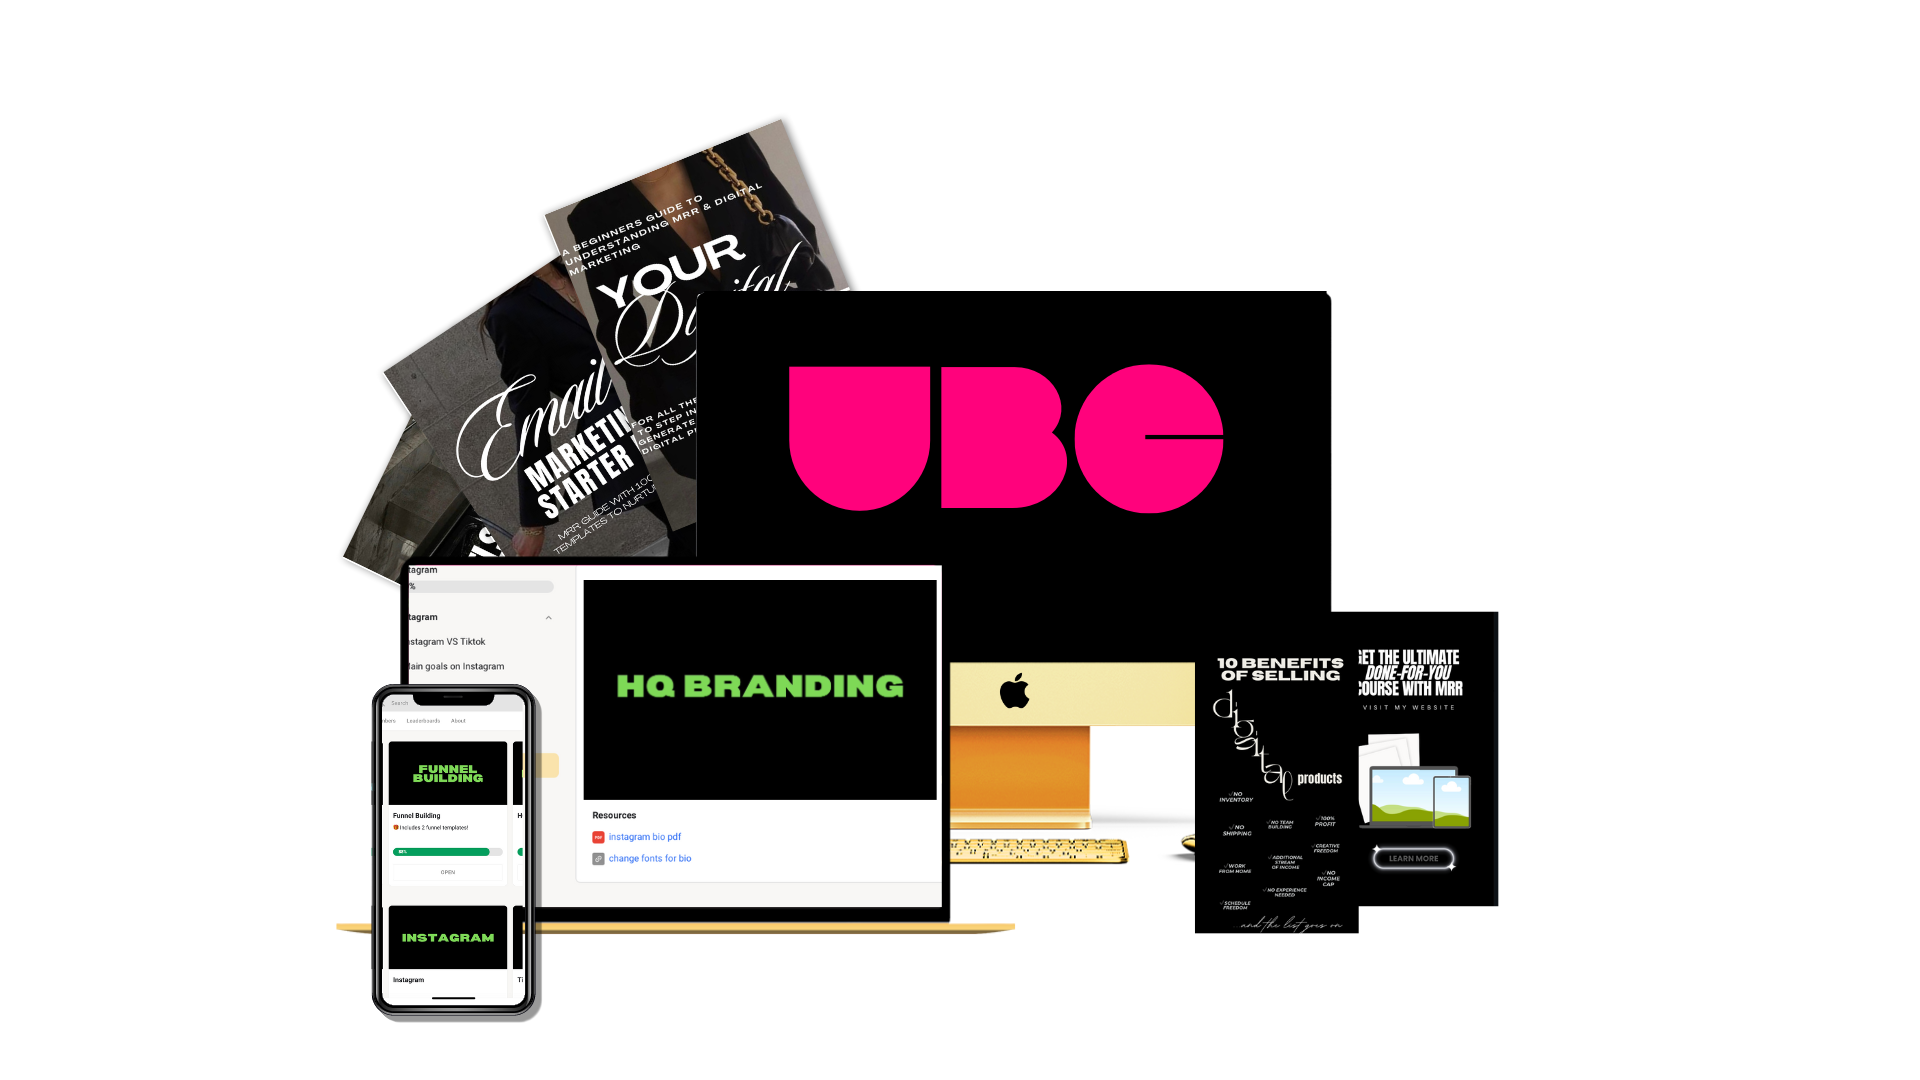 UBC - THE ULTIMATE BRANDING COURSE WITH MASTER RESELLER RIGHTS